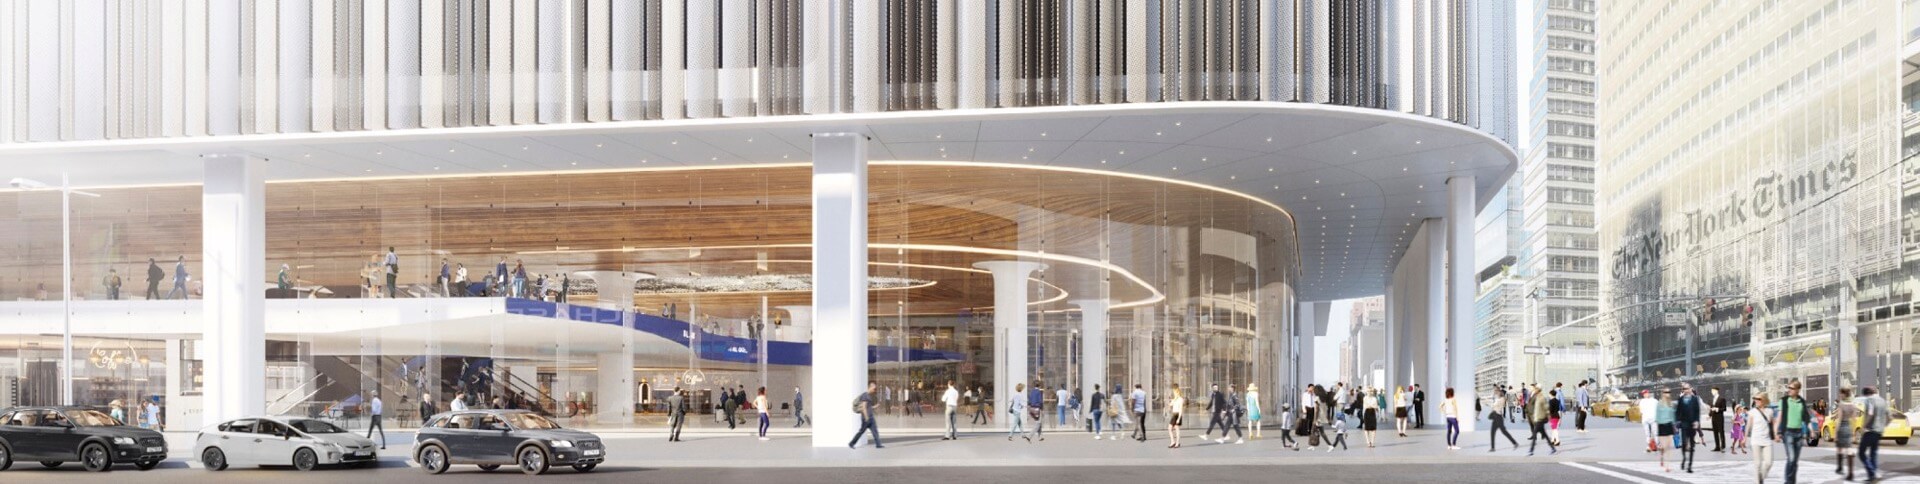 exterior rendering of a new midtown bus terminal